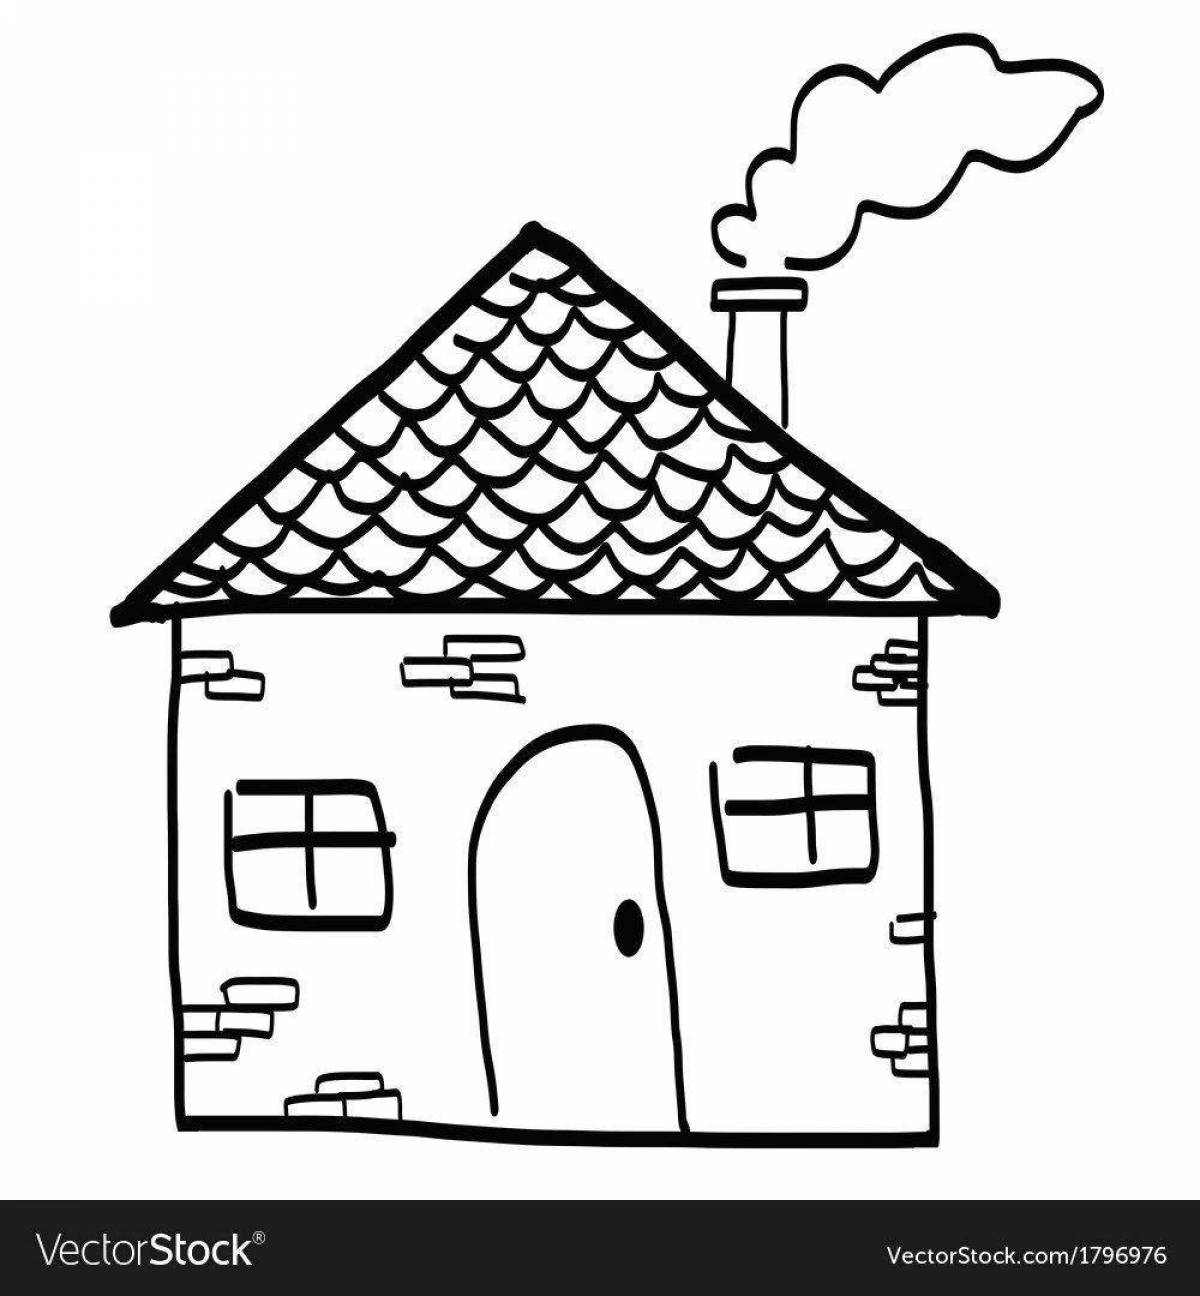 Coloring page spectacular house roof